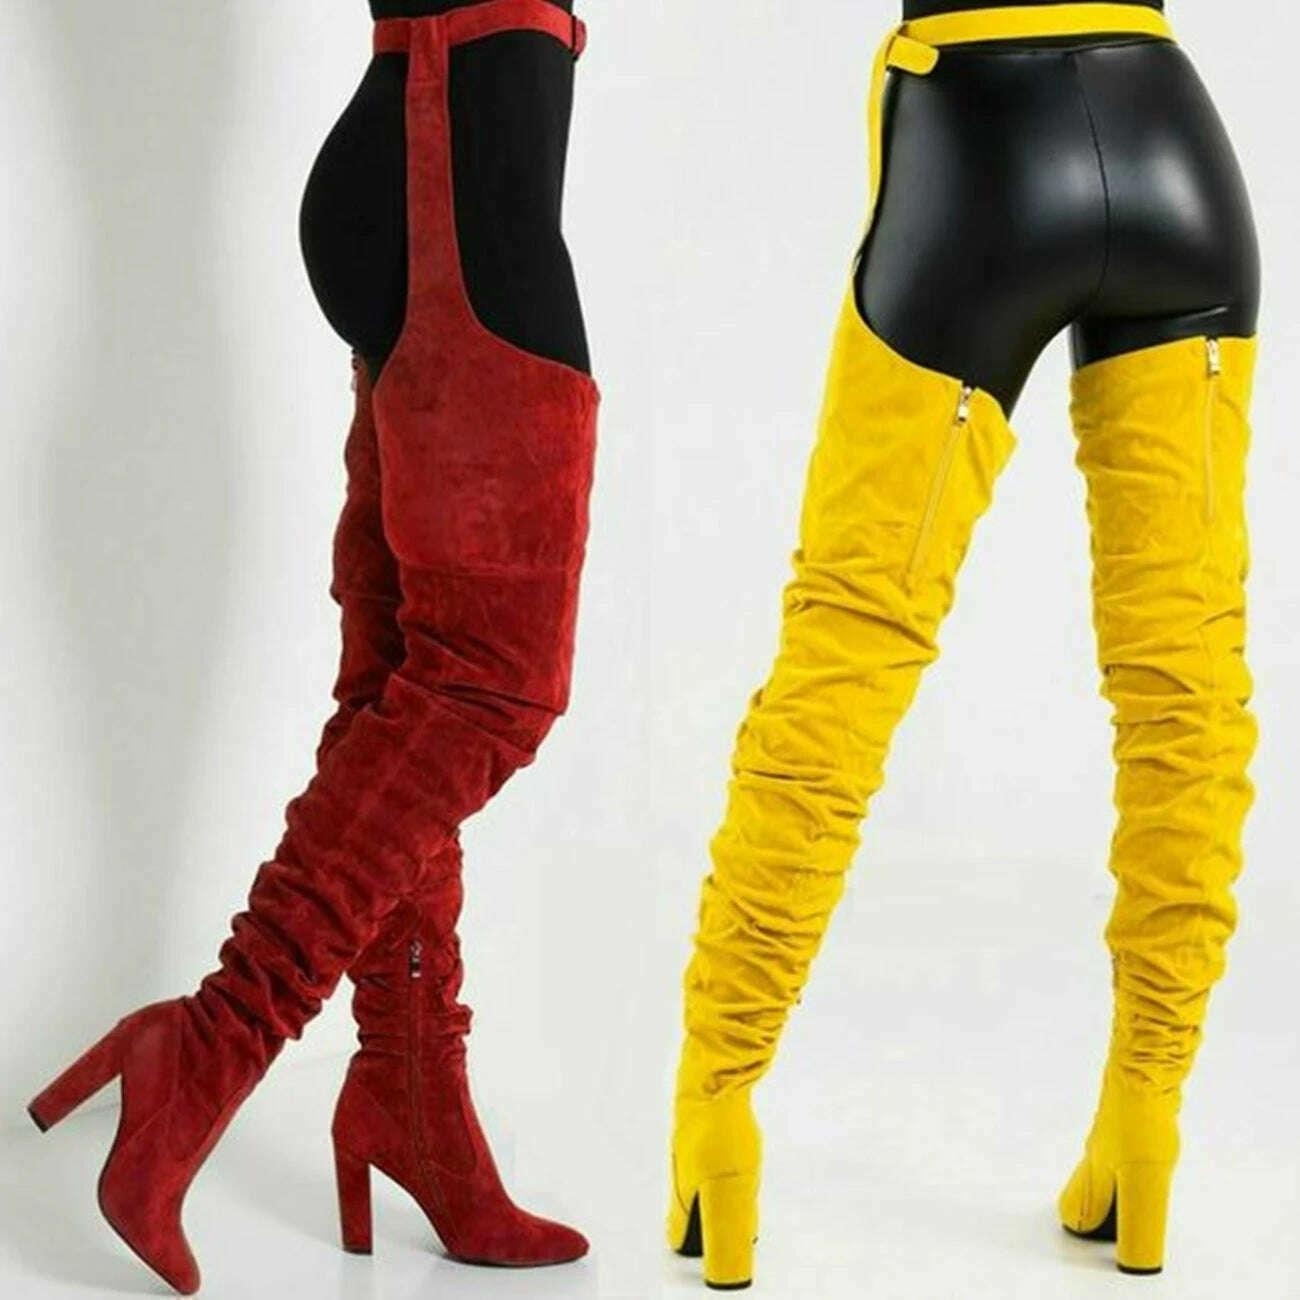 KIMLUD, Sestito Women Sexy Side Zipper Thigh High Boots Female Belt Trousers Boots Ladies Flock Pointed Toe Suqare High Heels Boots, Yellow / 34, KIMLUD Women's Clothes